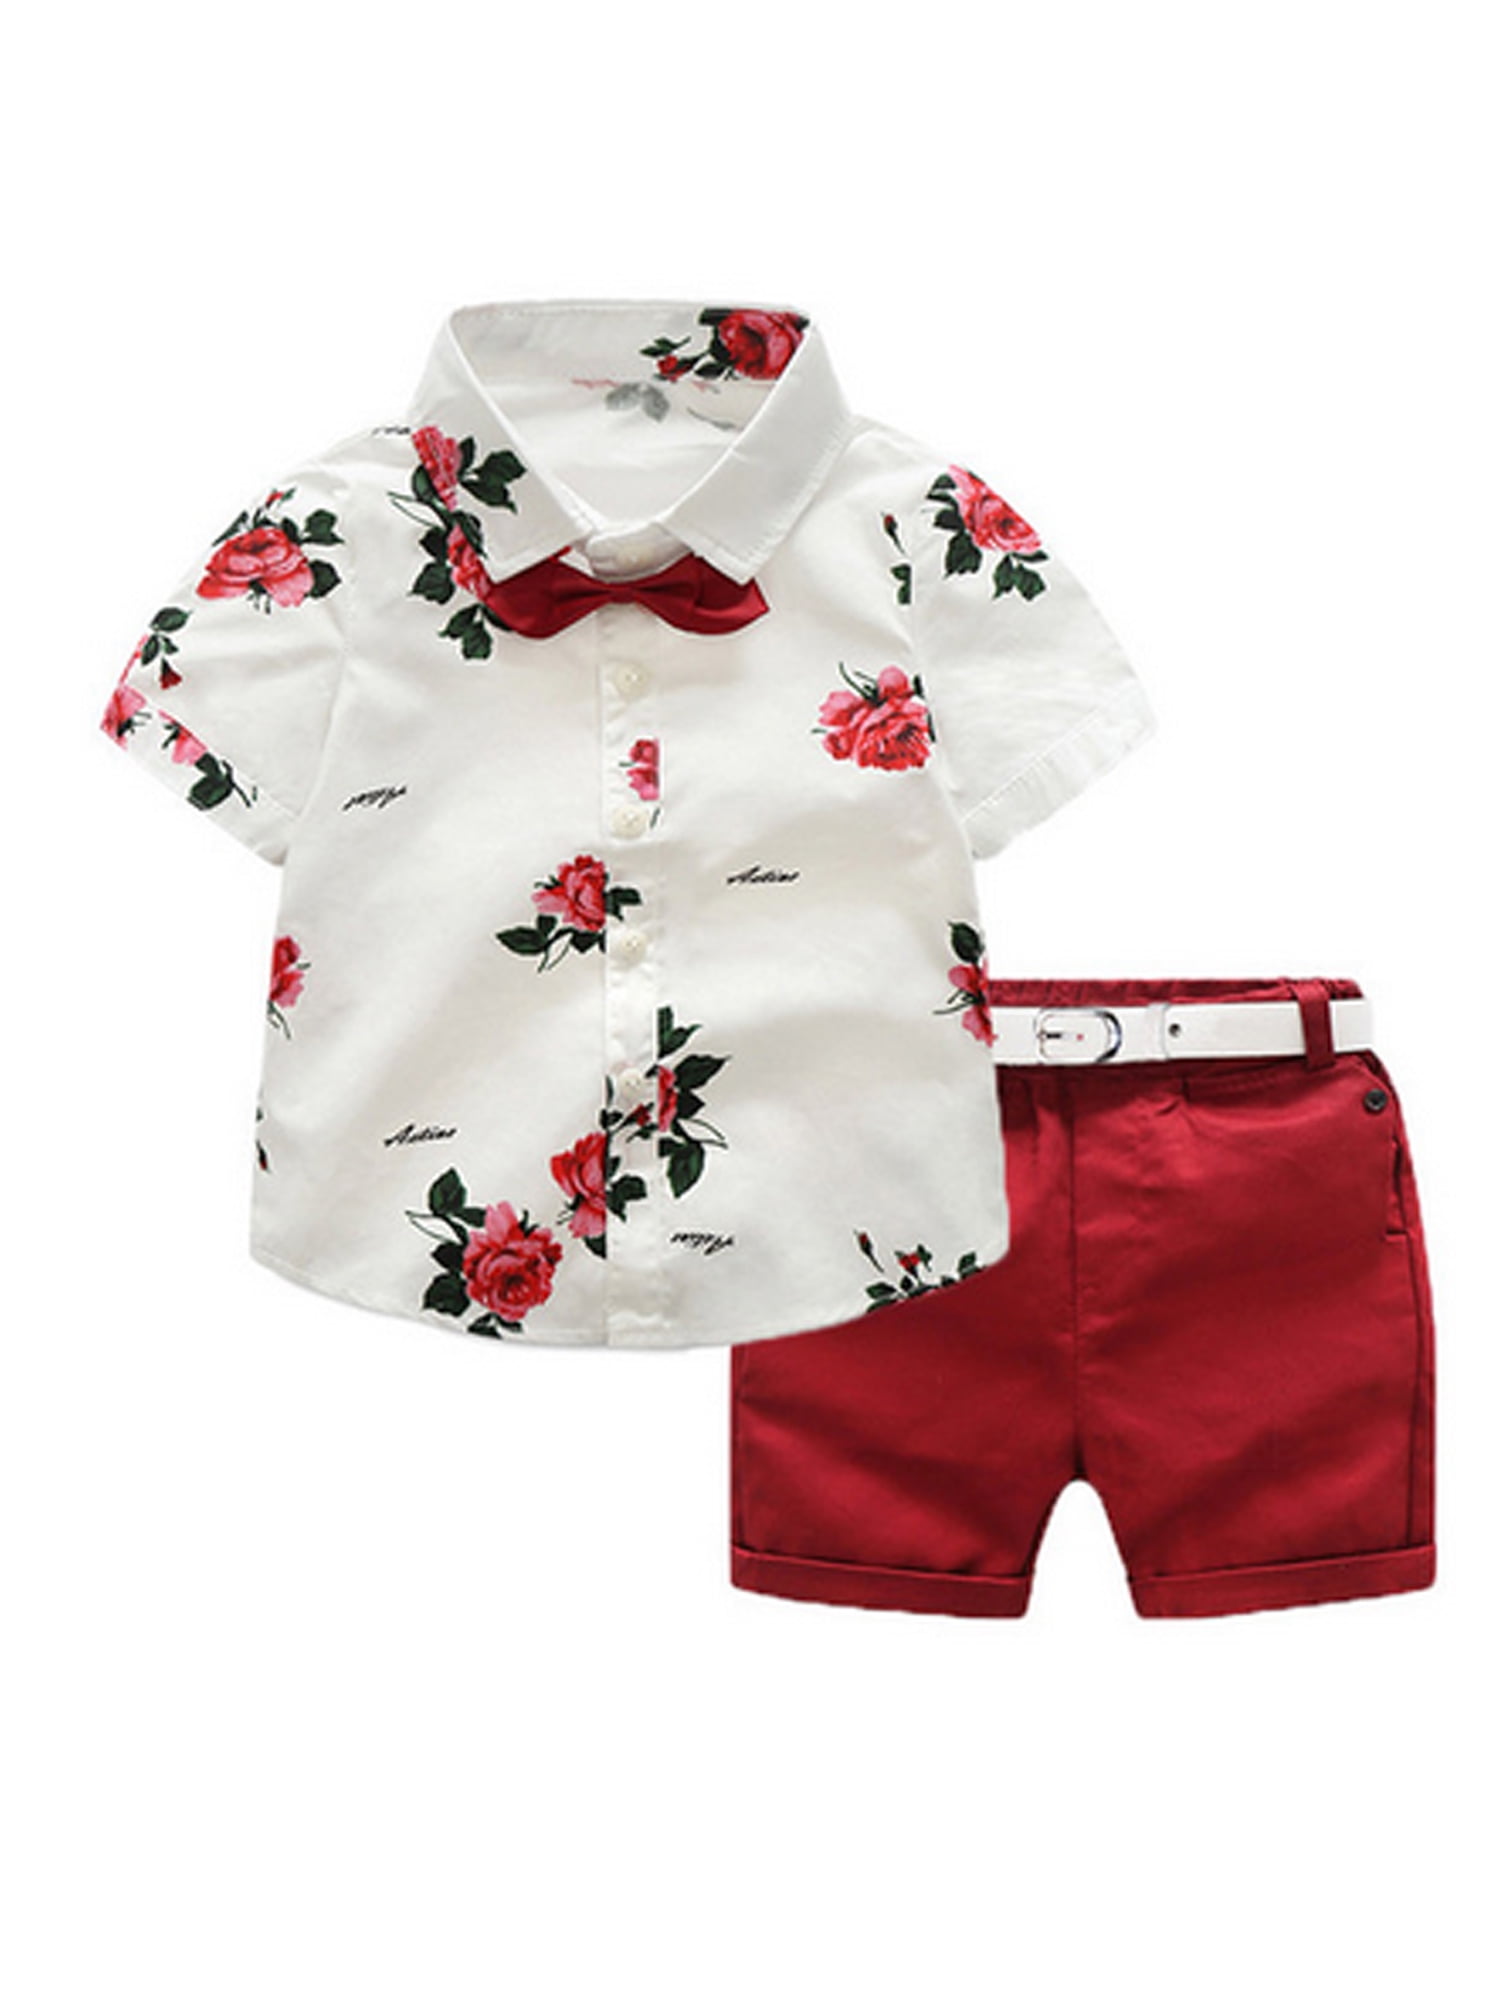 Baby Boys Outfits Short Sleeve T-Shirt Tops Short Pants Kids Summer Clothes 